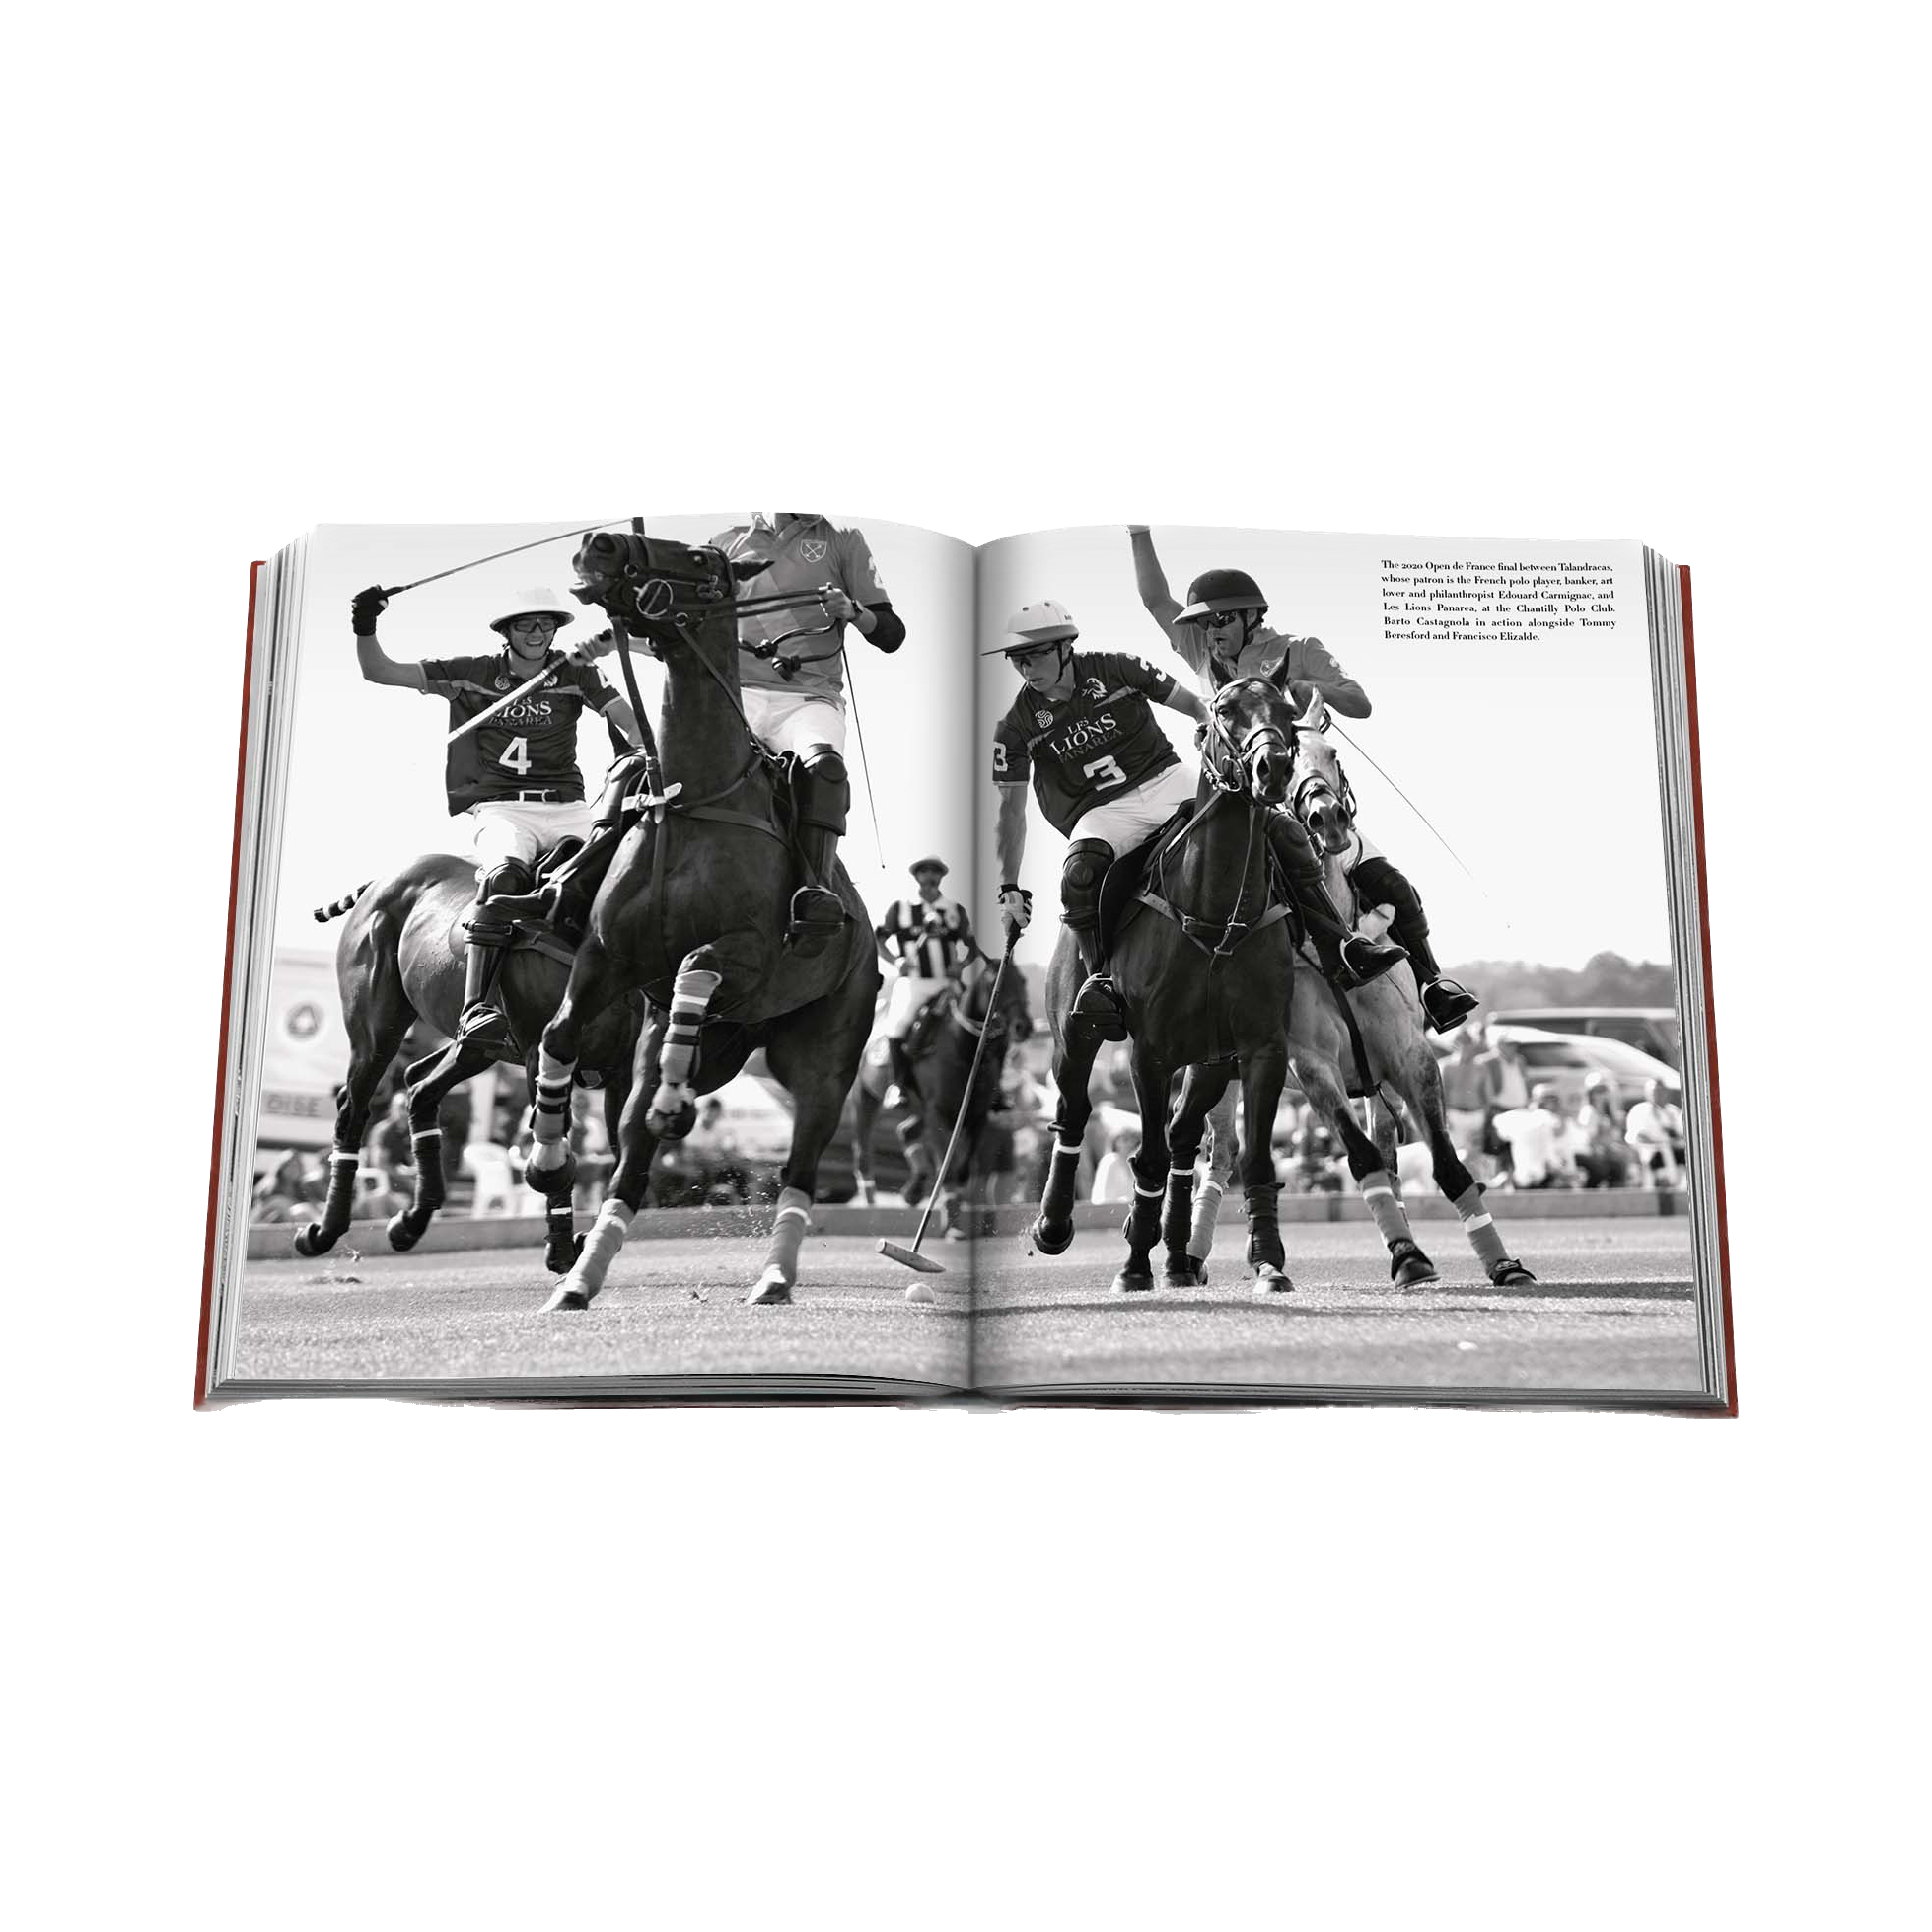 86459 Assouline Polo Heritage Coffee table book